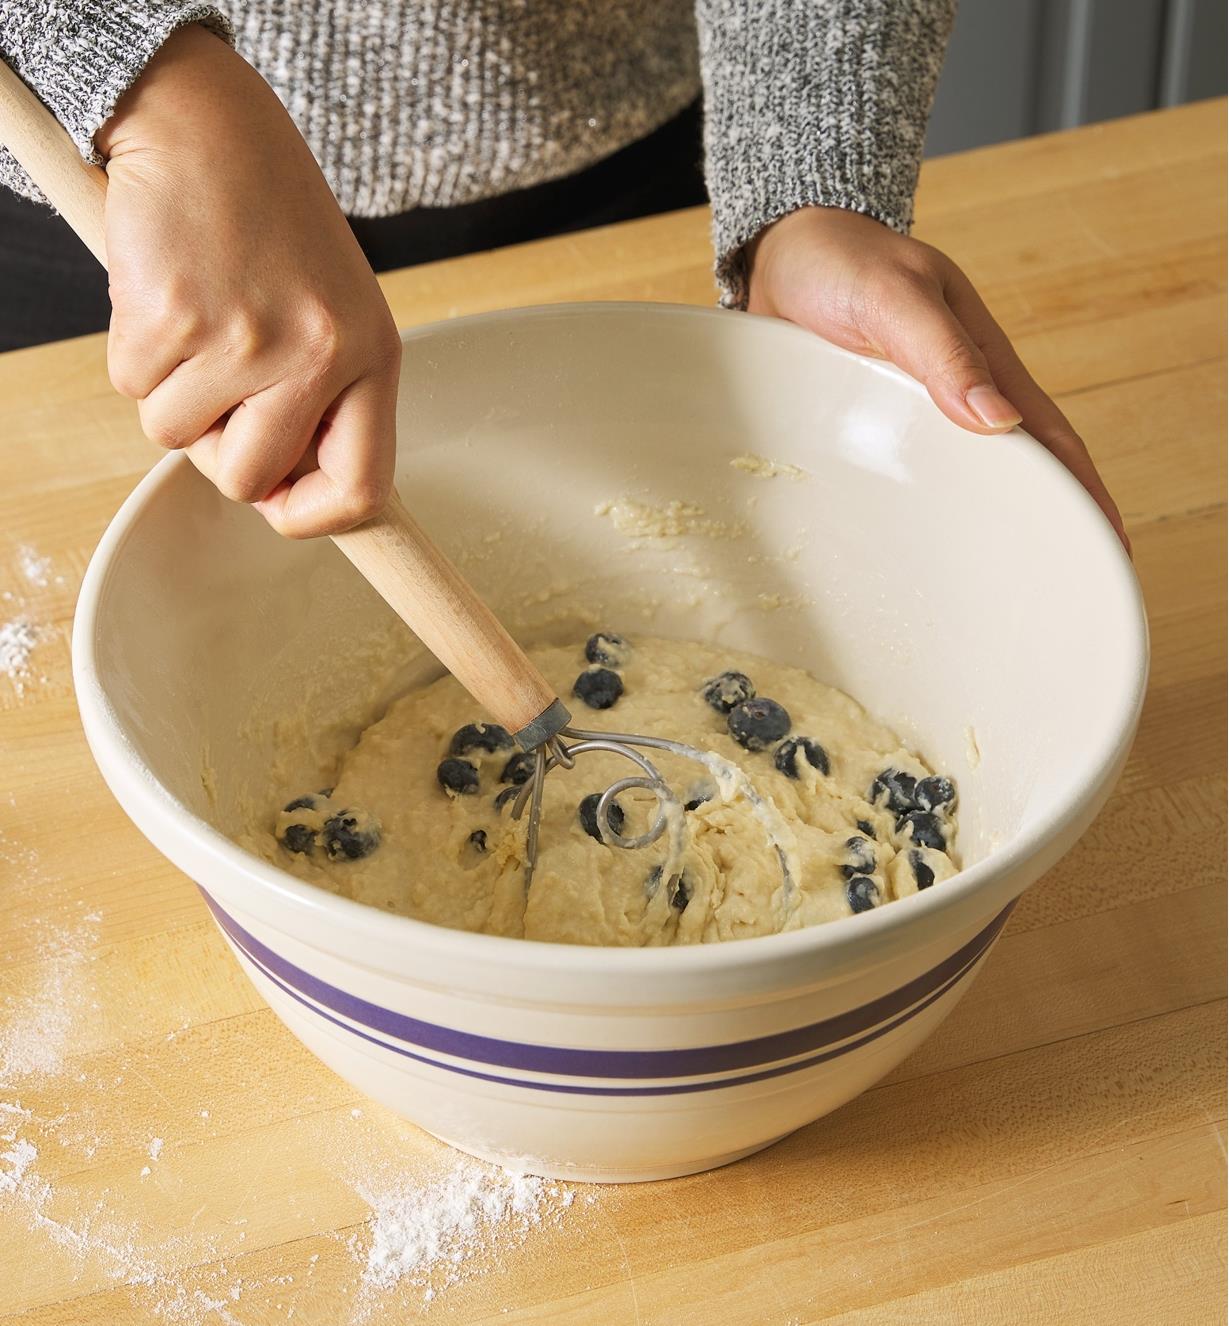 Using a whisk to combine ingredients in the 12"" Dominion mixing bowl